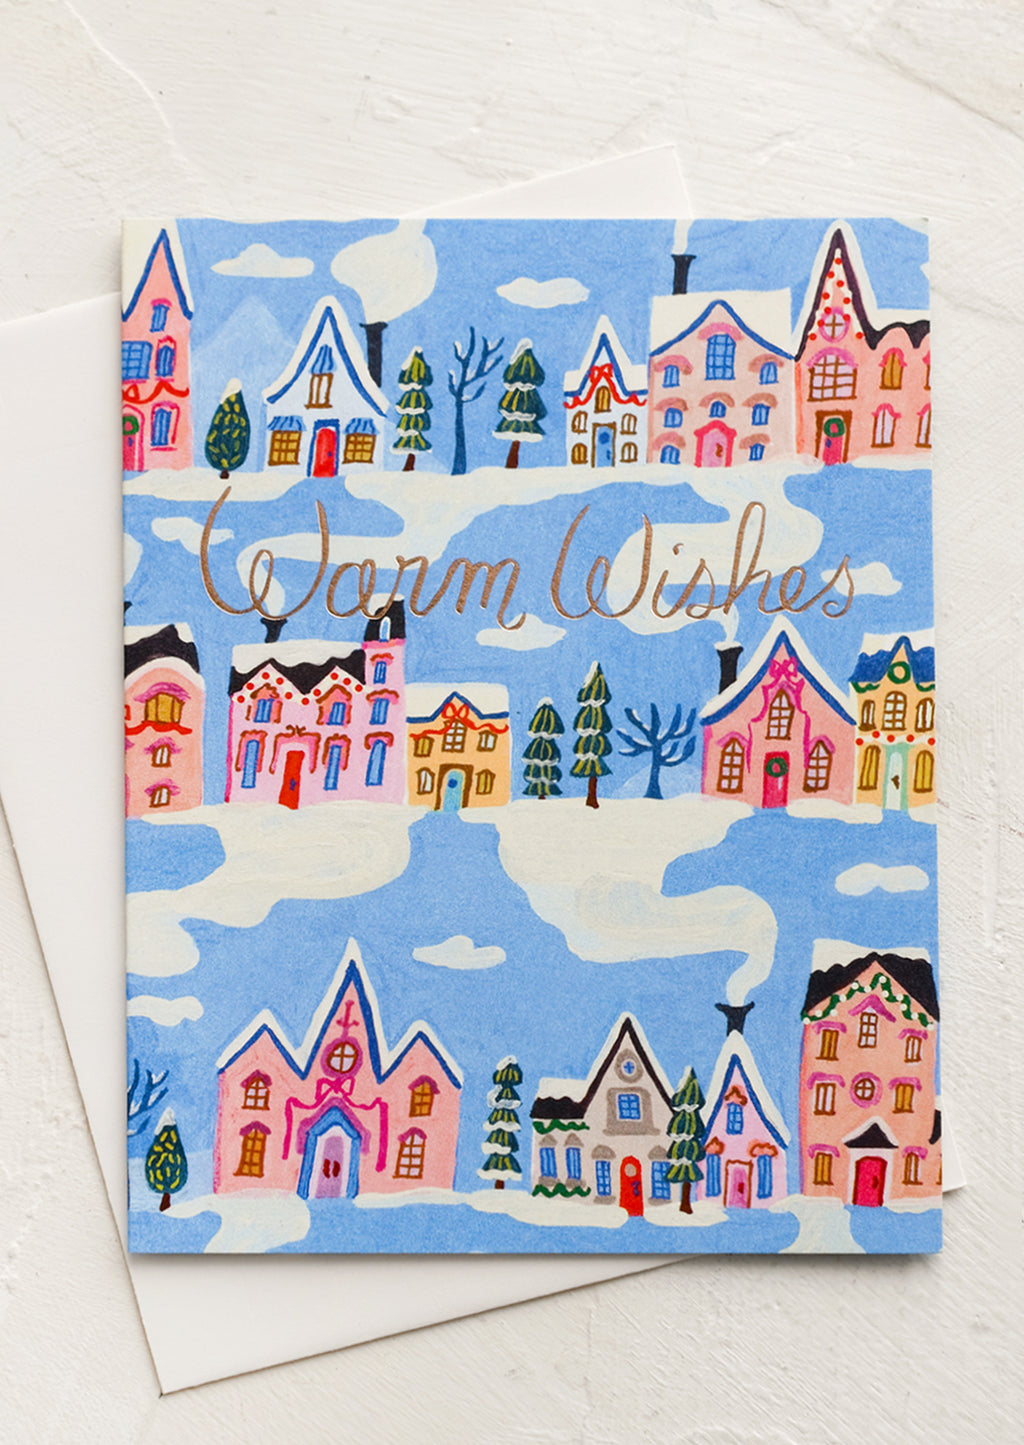 2: Greeting card with blue background and repeating rows of houses and trees. "Warm Wishes" written in copper script.